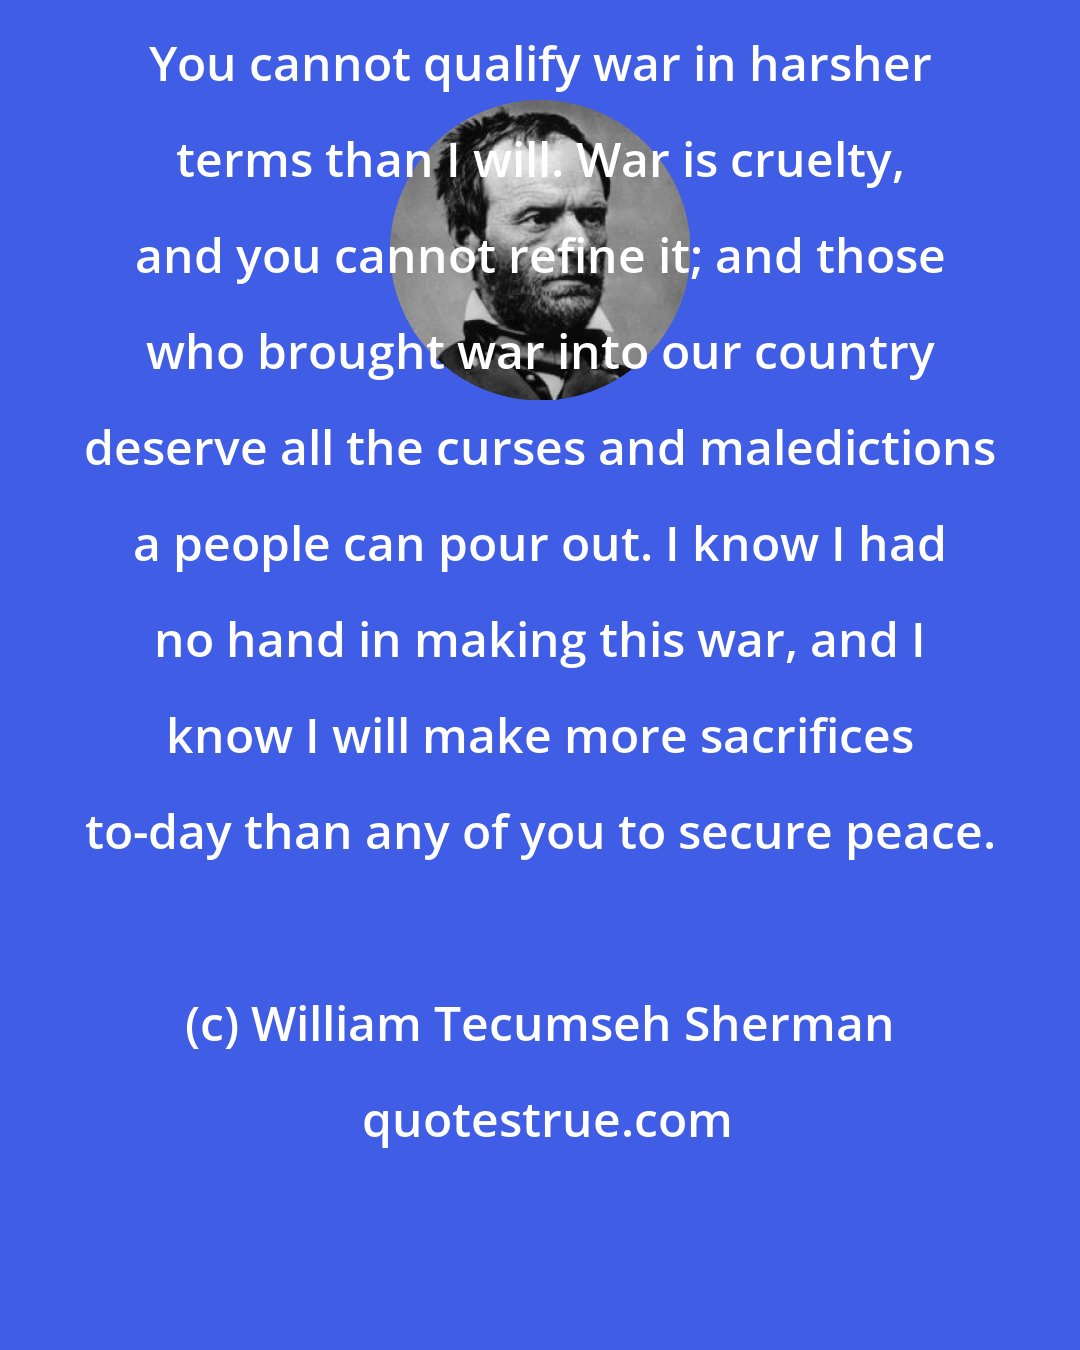 William Tecumseh Sherman: You cannot qualify war in harsher terms than I will. War is cruelty, and you cannot refine it; and those who brought war into our country deserve all the curses and maledictions a people can pour out. I know I had no hand in making this war, and I know I will make more sacrifices to-day than any of you to secure peace.